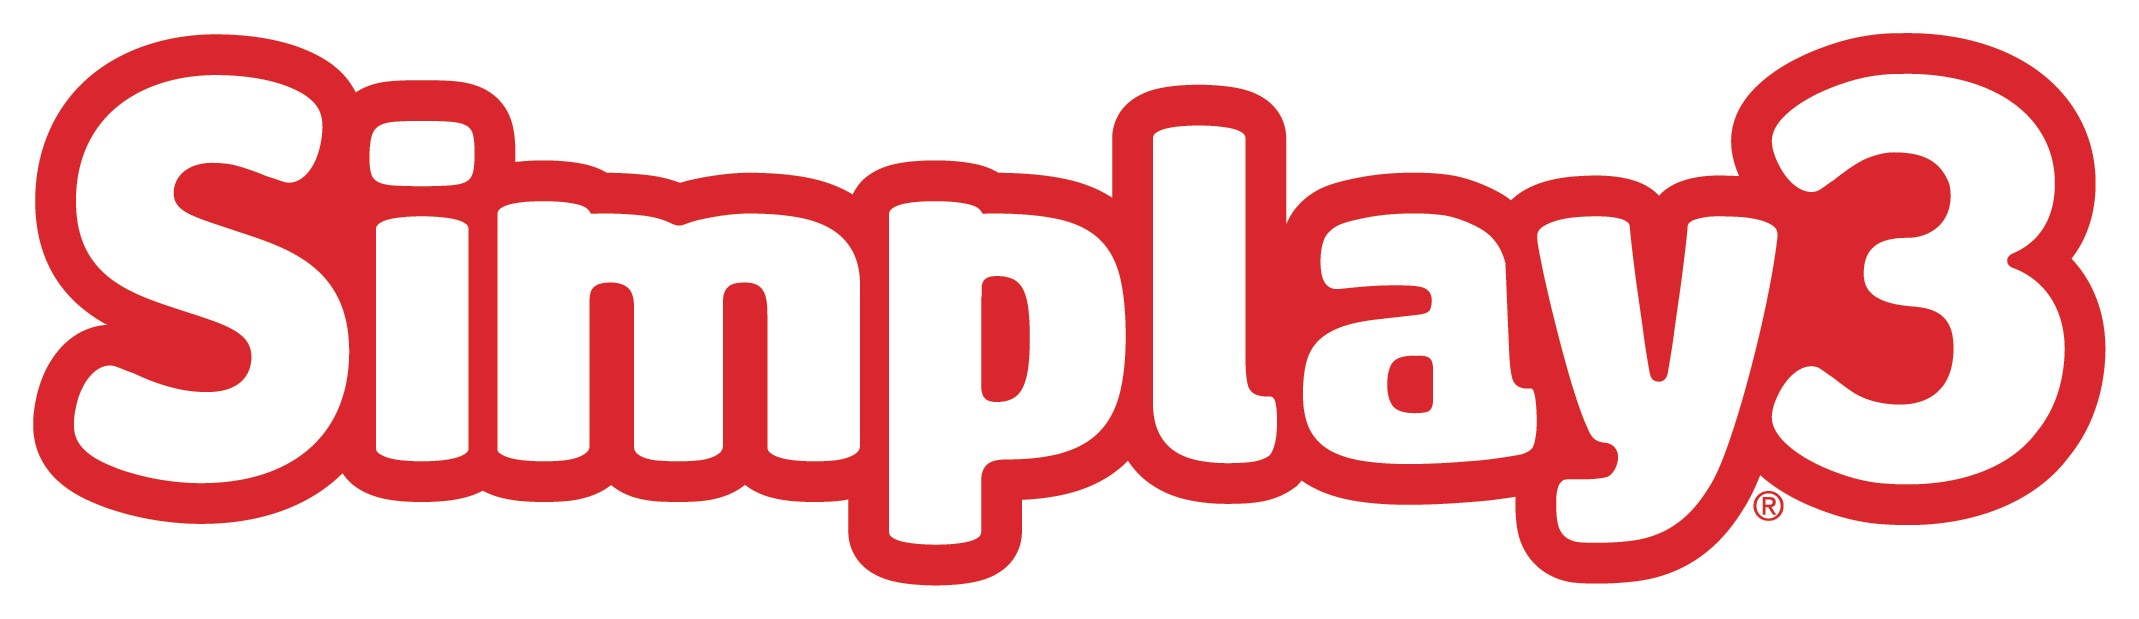 Simplay3 logo in white font and red outline.